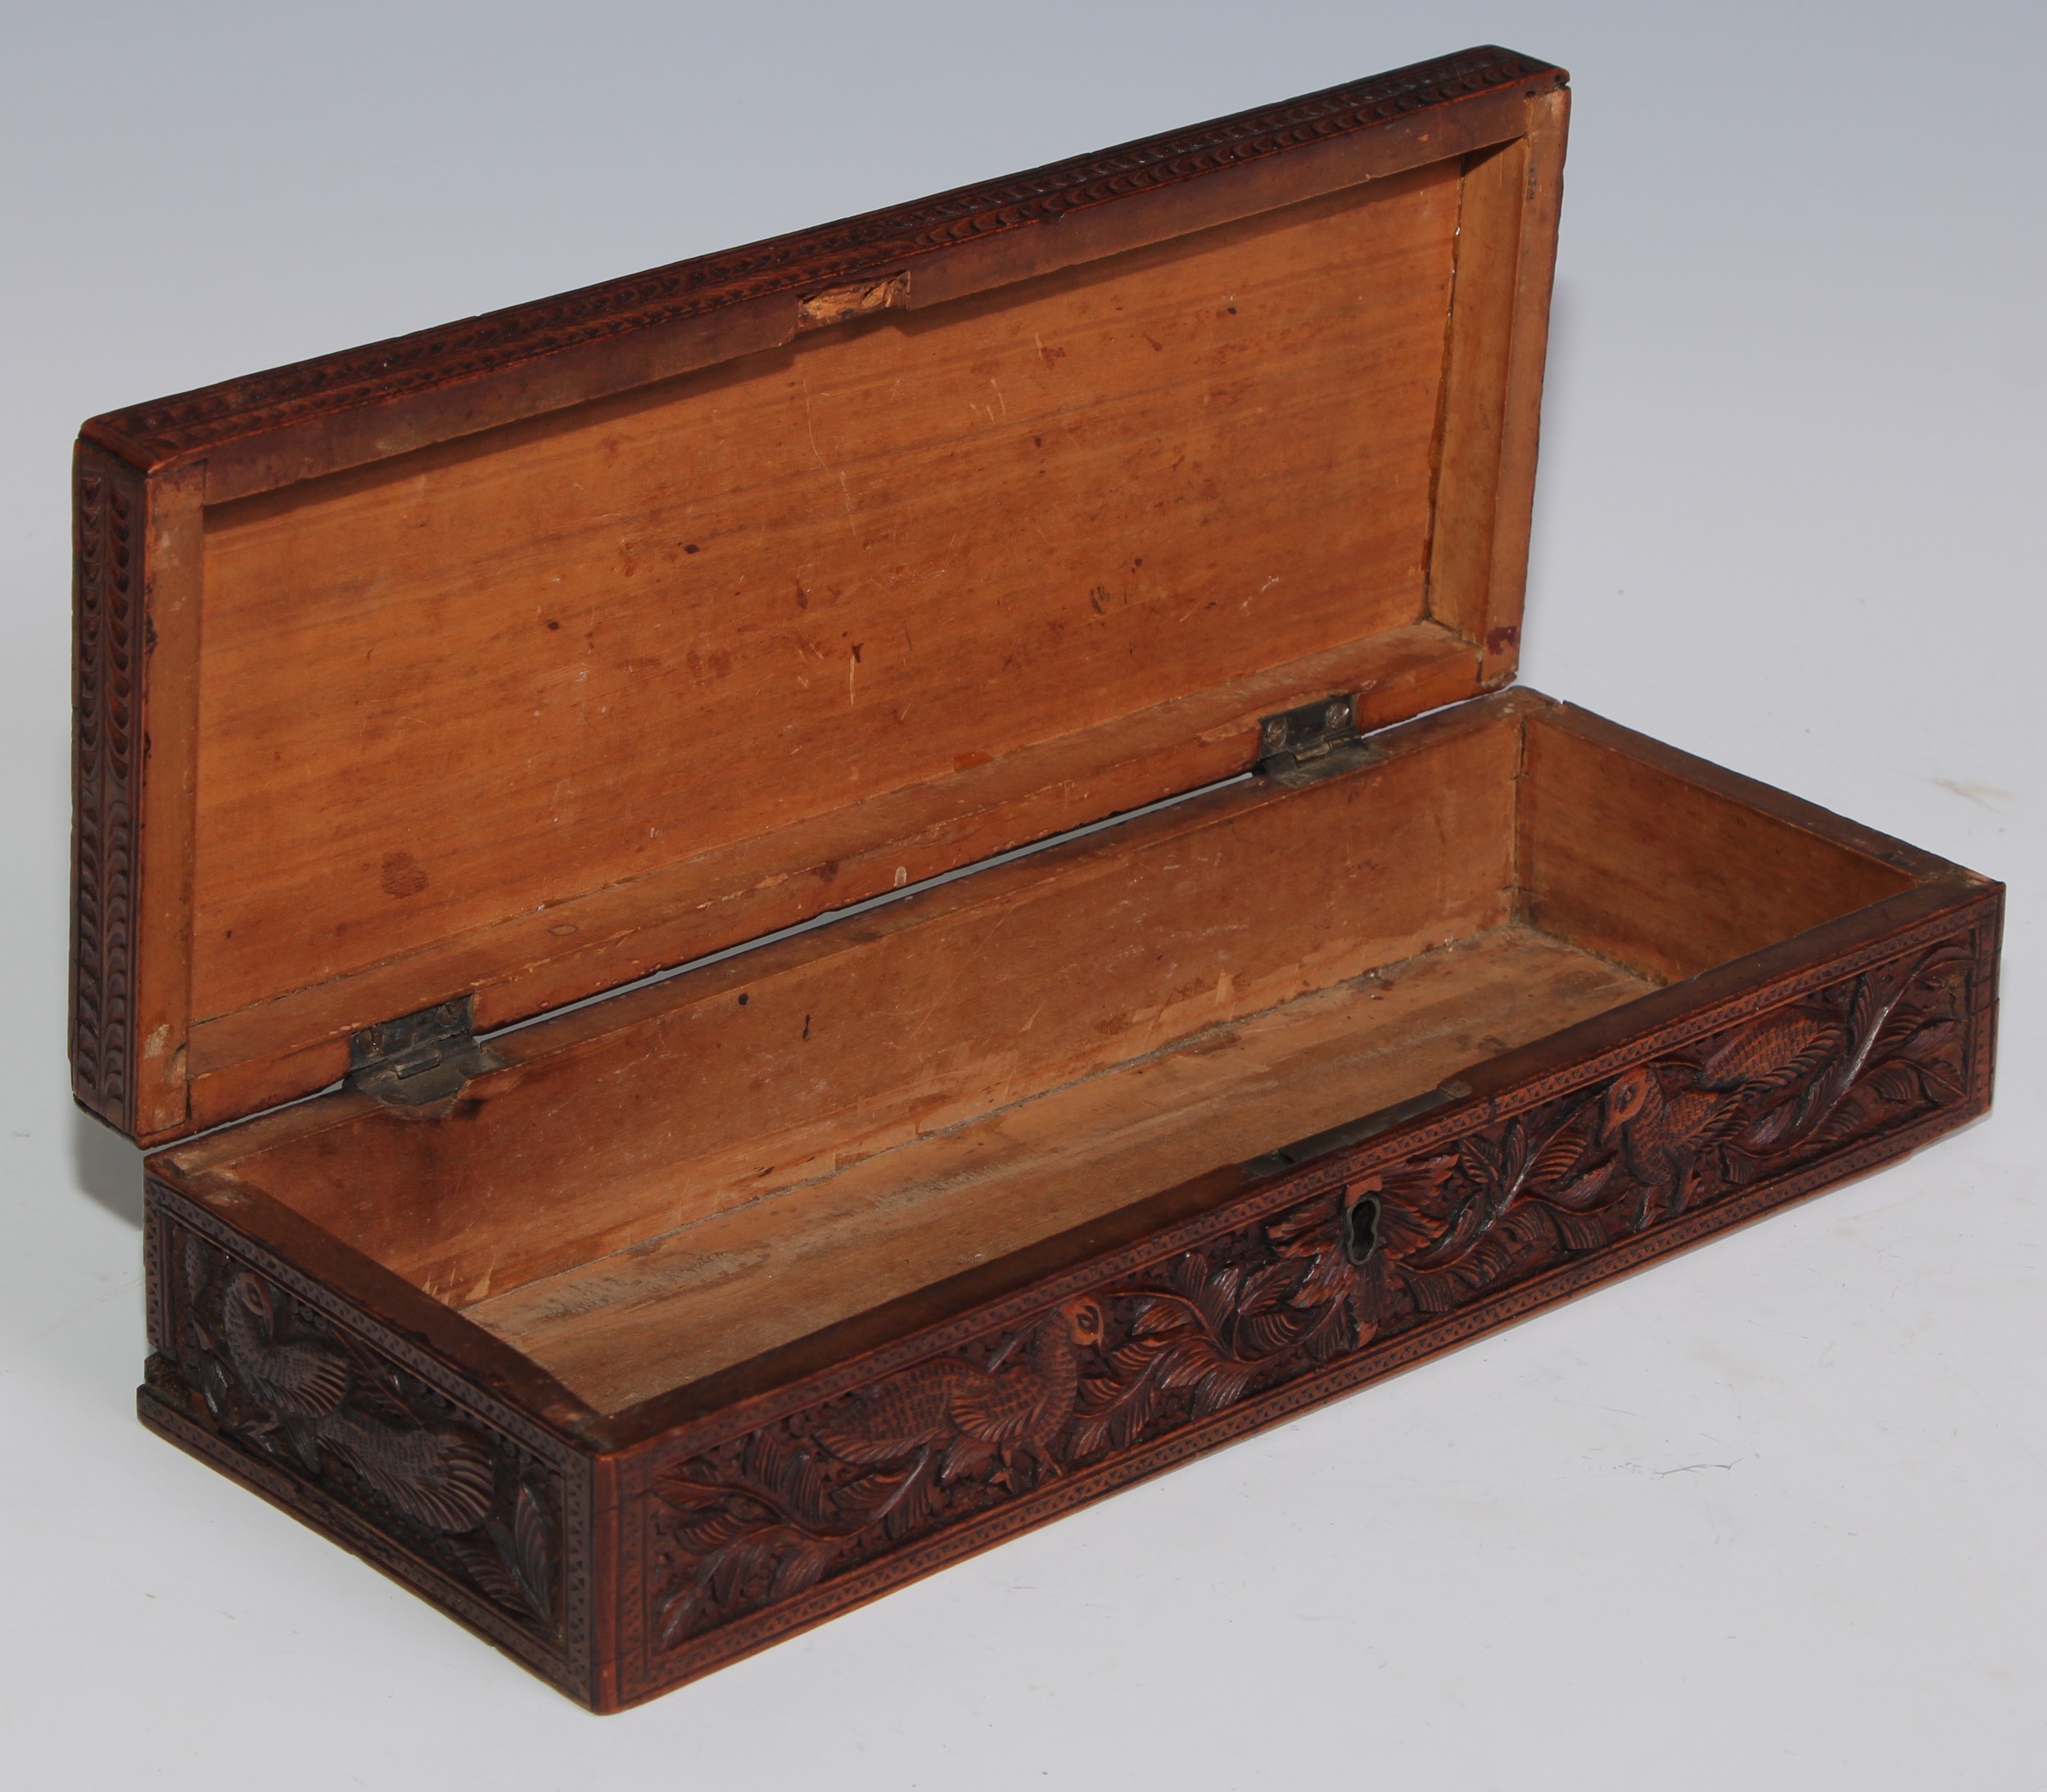 An Indian sandalwood rectangular box, hinged cover, carved in relief with peacocks, architecture, - Image 3 of 3